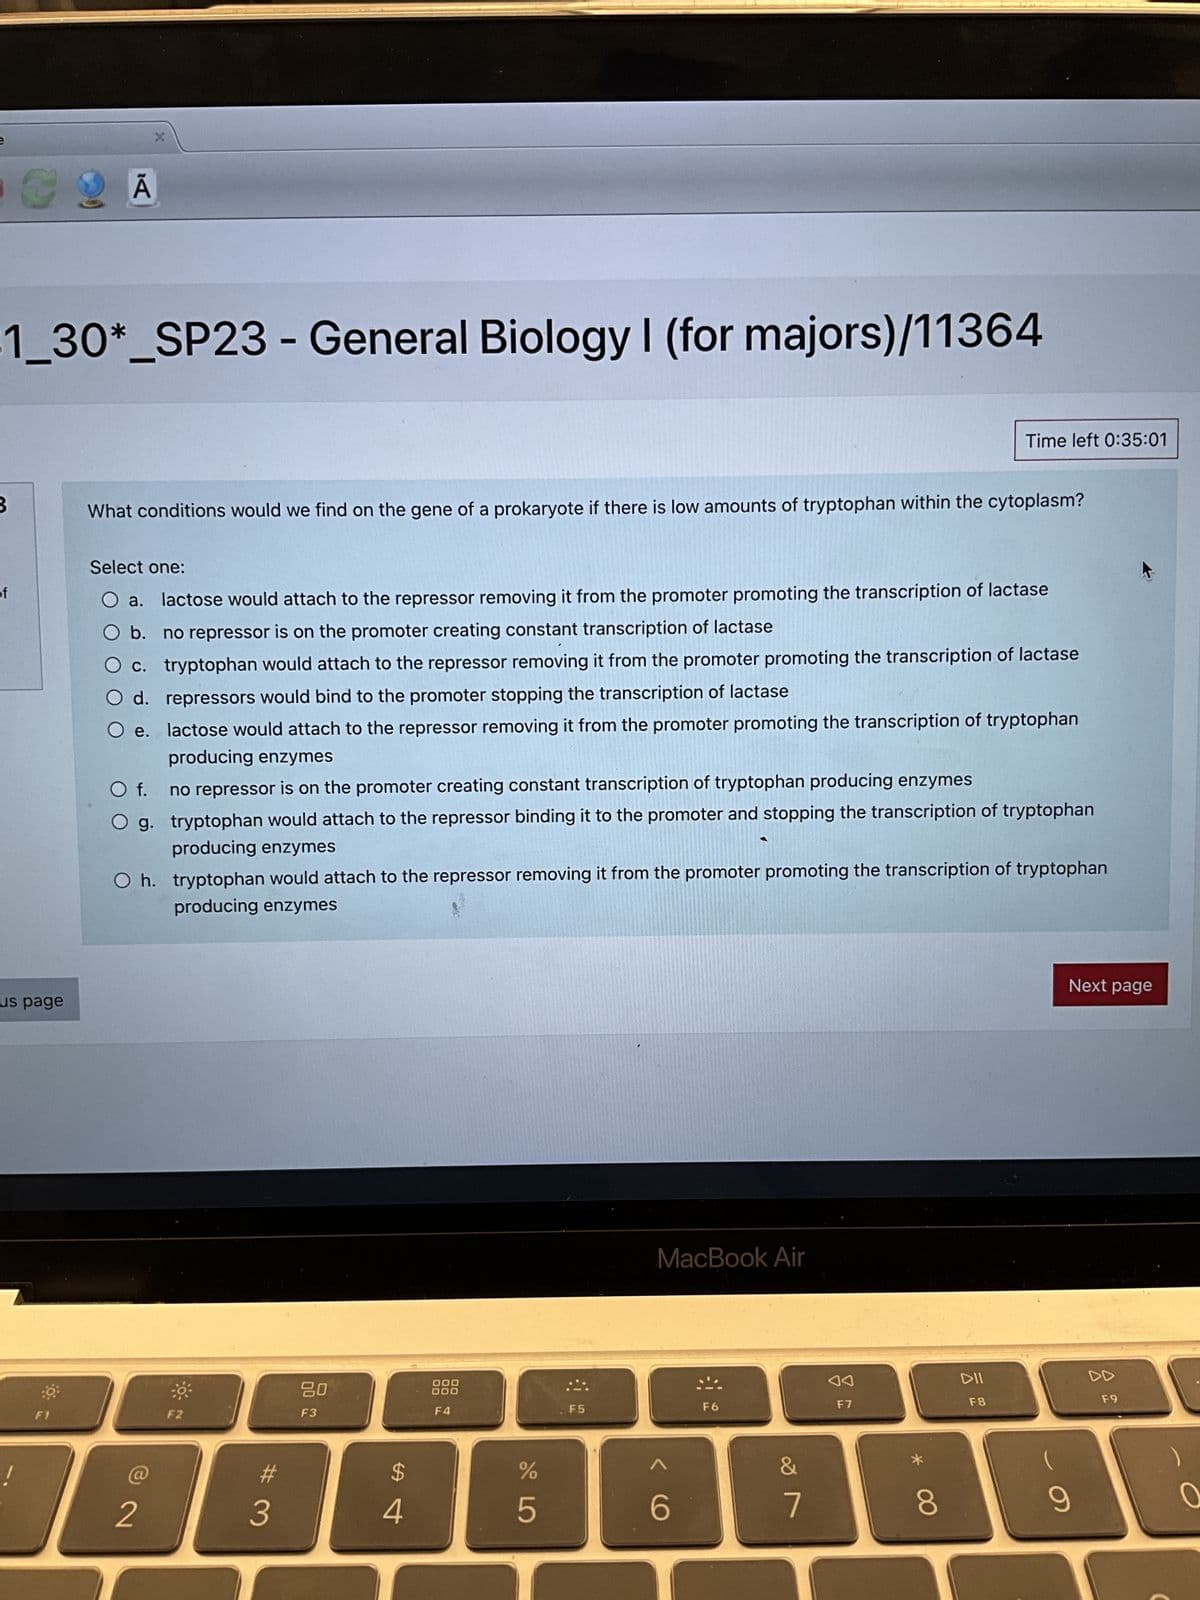 e
B
1_30*_SP23 - General Biology I (for majors)/11364
of
€ 2 A
us page
X
F1
What conditions would we find on the gene of a prokaryote if there is low amounts of tryptophan within the cytoplasm?
Select one:
a. lactose would attach to the repressor removing it from the promoter promoting the transcription of lactase
b. no repressor is on the promoter creating constant transcription of lactase
c. tryptophan would attach to the repressor removing it from the promoter promoting the transcription of lactase
O d. repressors would bind to the promoter stopping the transcription of lactase
e.
lactose would attach to the repressor removing it from the promoter promoting the transcription of tryptophan
producing enzymes
no repressor is on the promoter creating constant transcription of tryptophan producing enzymes
tryptophan would attach to the repressor binding it to the promoter and stopping the transcription of tryptophan
producing enzymes
O f.
O g.
2
Oh. tryptophan would attach to the repressor removing it from the promoter promoting the transcription of tryptophan
producing enzymes
F2
#
3
300
80
F3
$
4
000
F4
de L
%
5
F5
MacBook Air
6
F6
&
7
◄◄
F7
Time left 0:35:01
* 00
8
DII
F8
Next page
9
DD
F9
0